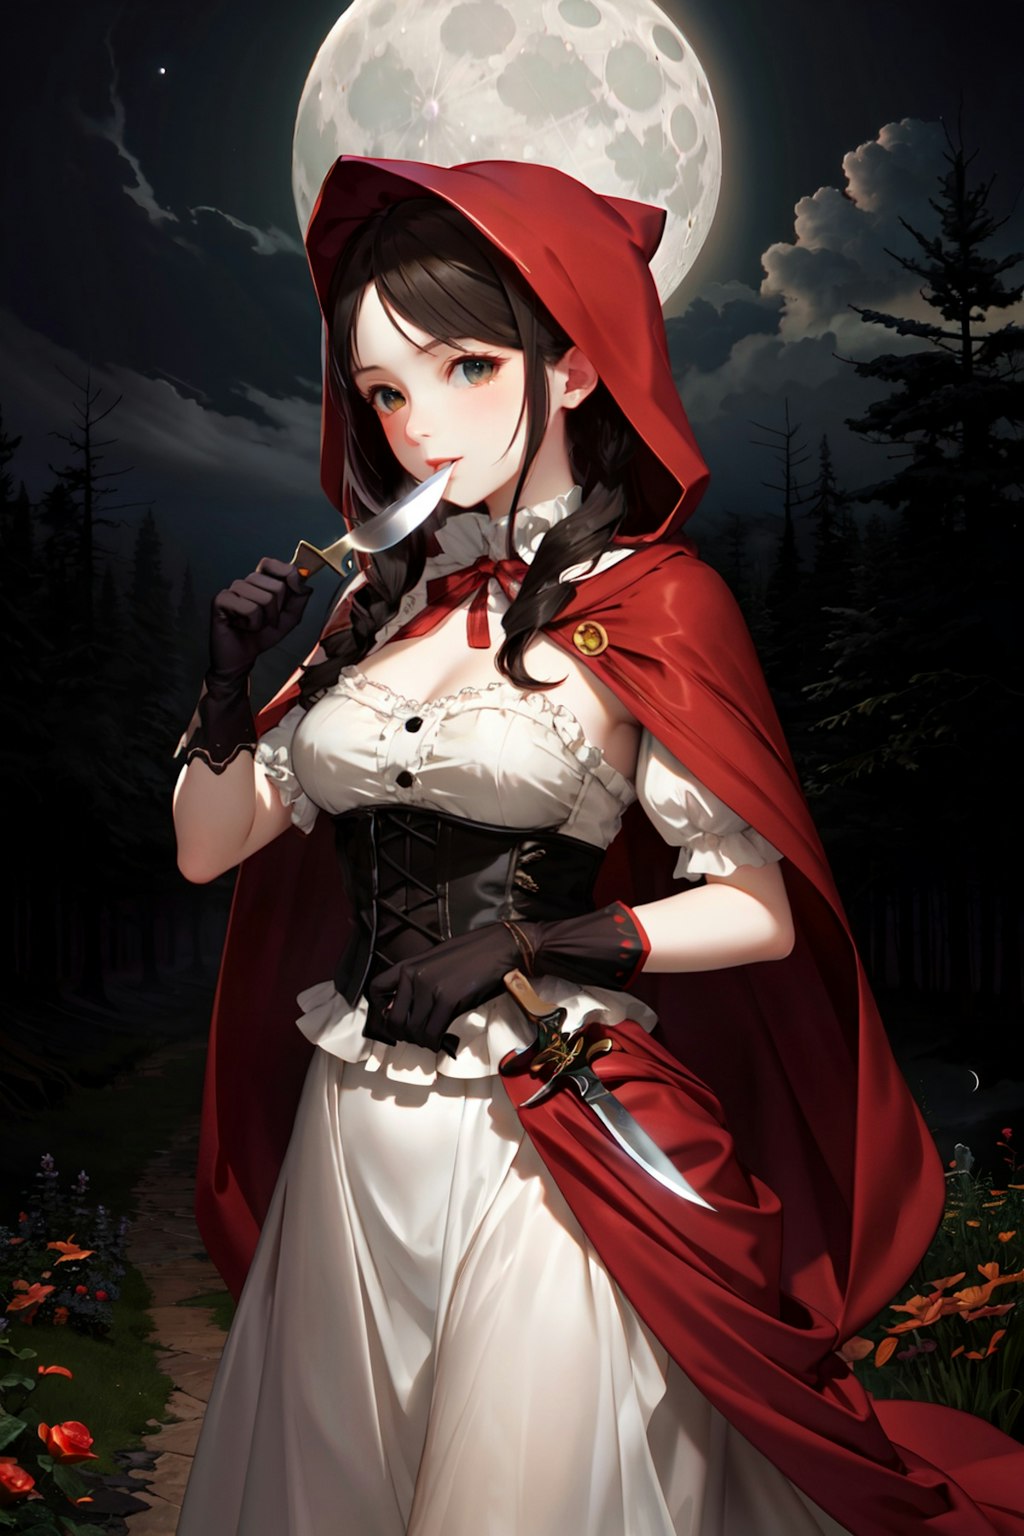 Little Red Riding Hood is going to hunt